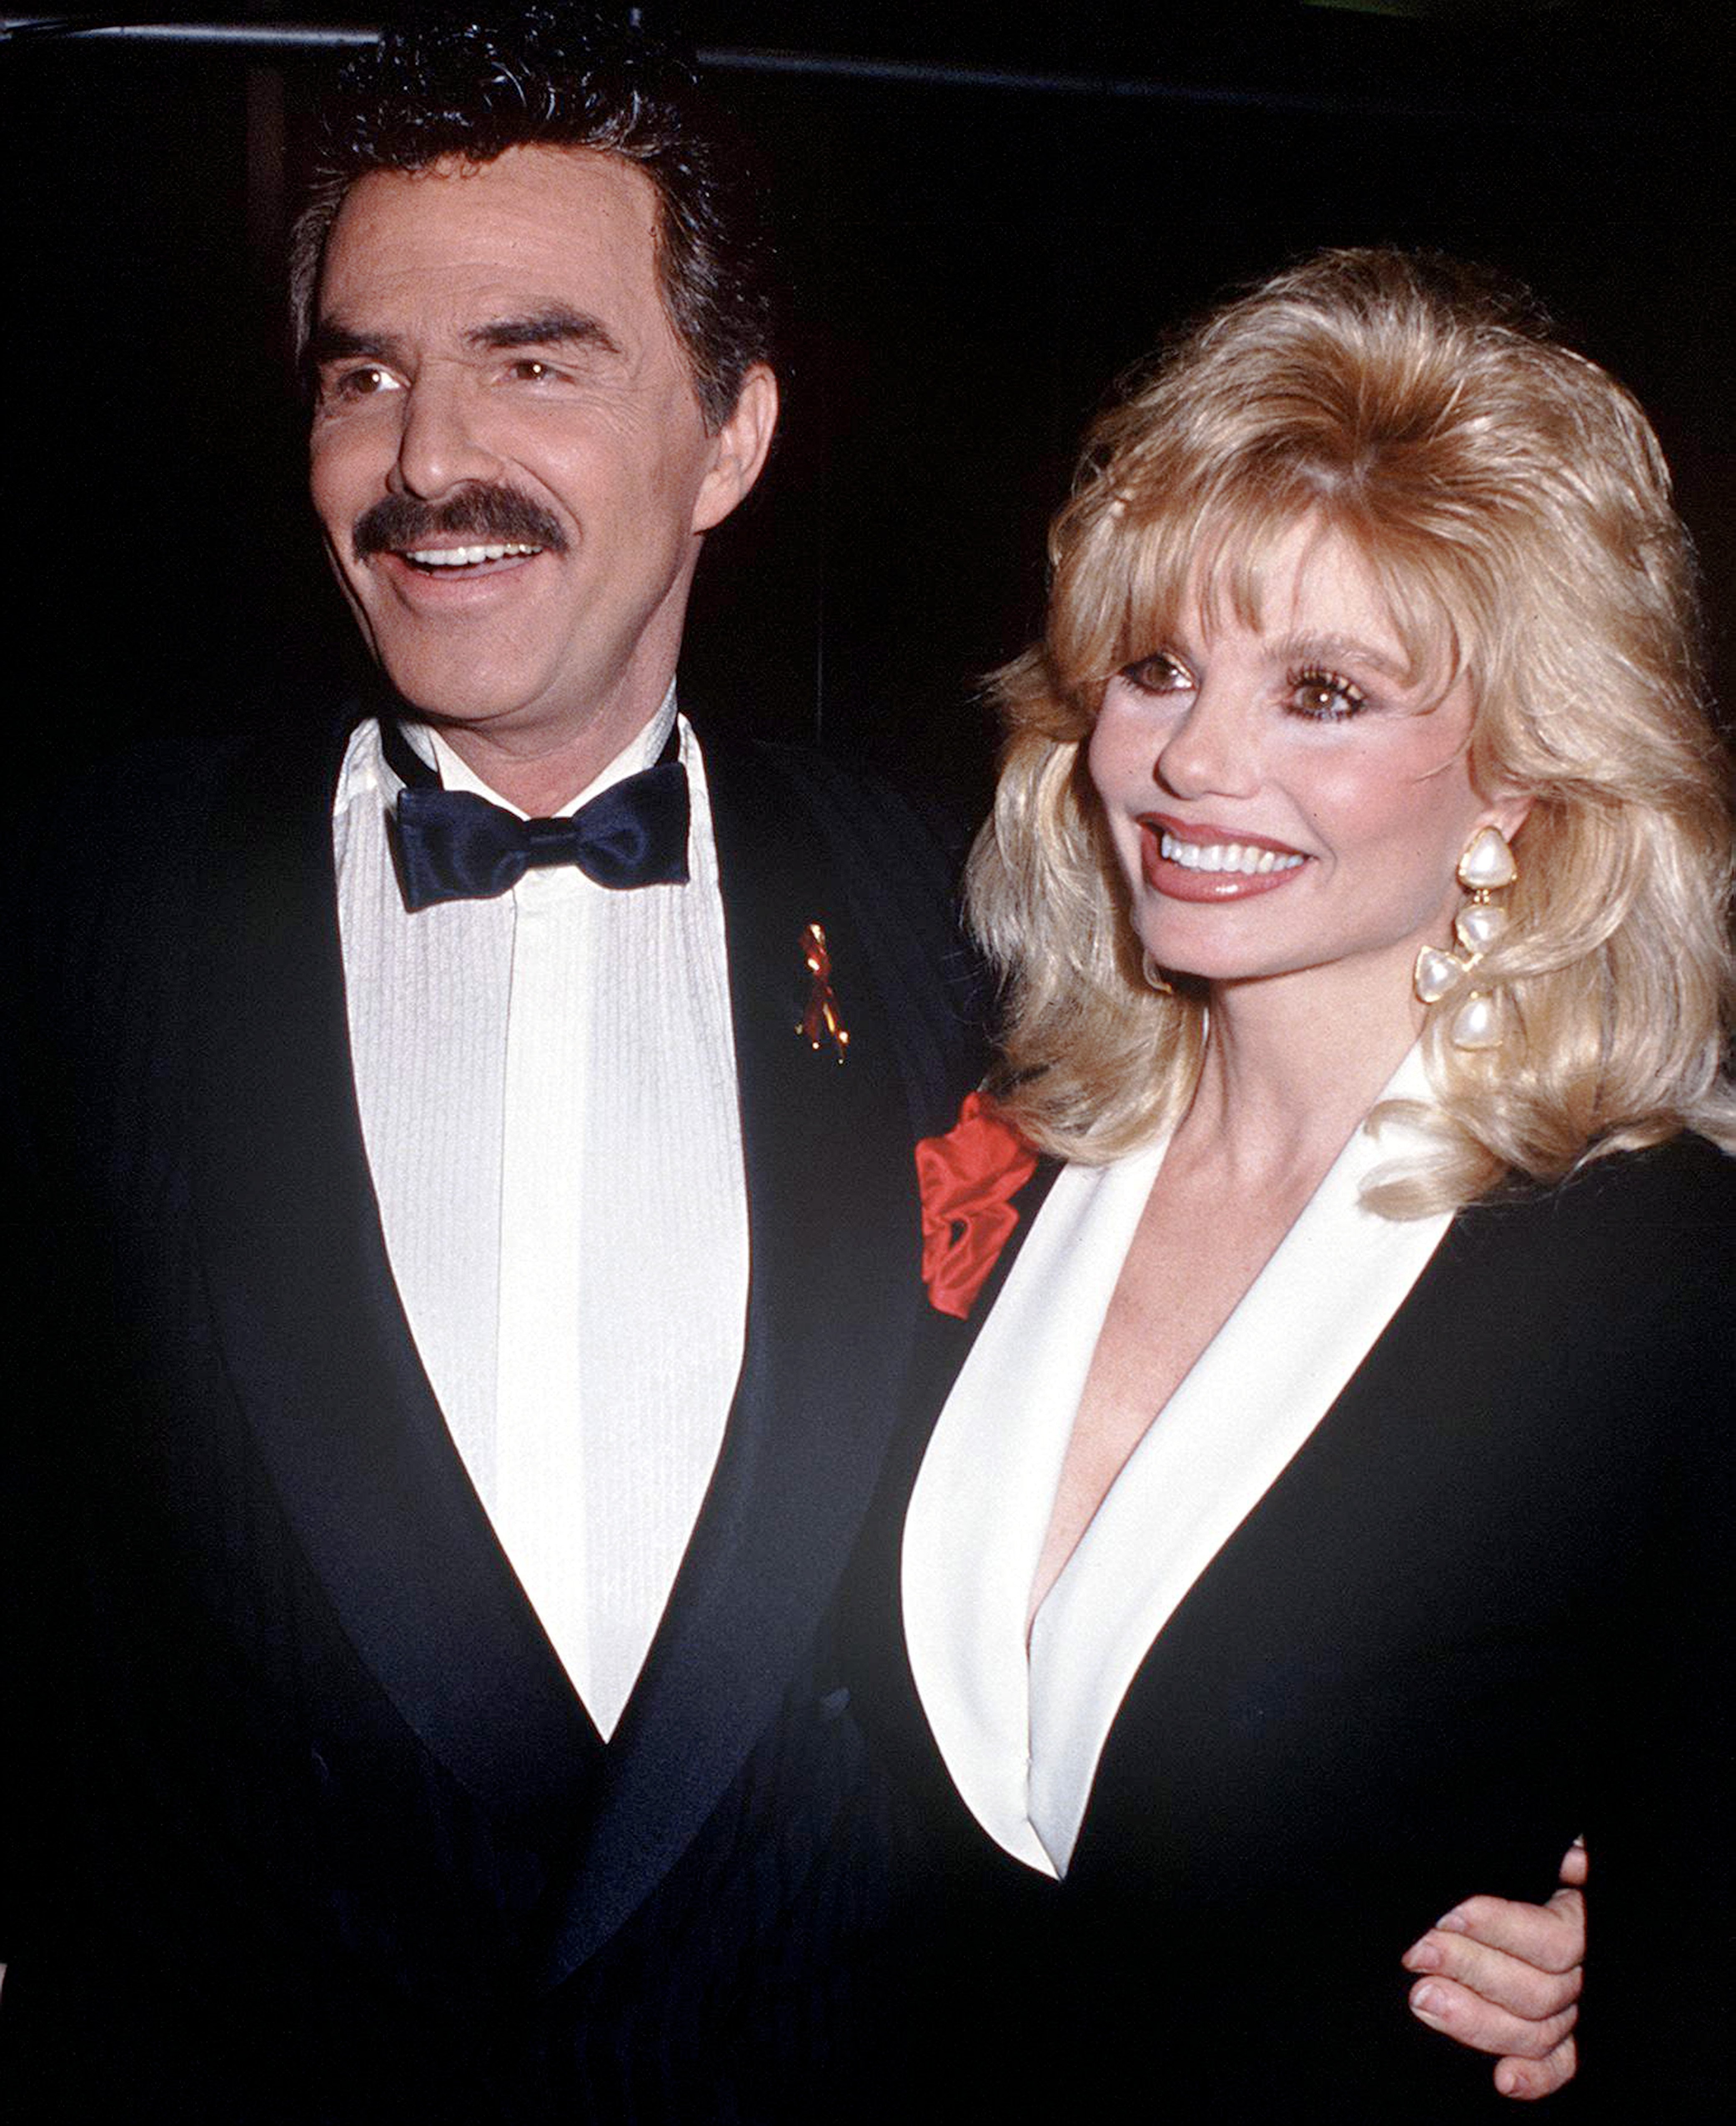 Burt Reynolds with his wife, actress Loni Anderson, circa 1992 | Photo: GettyImages